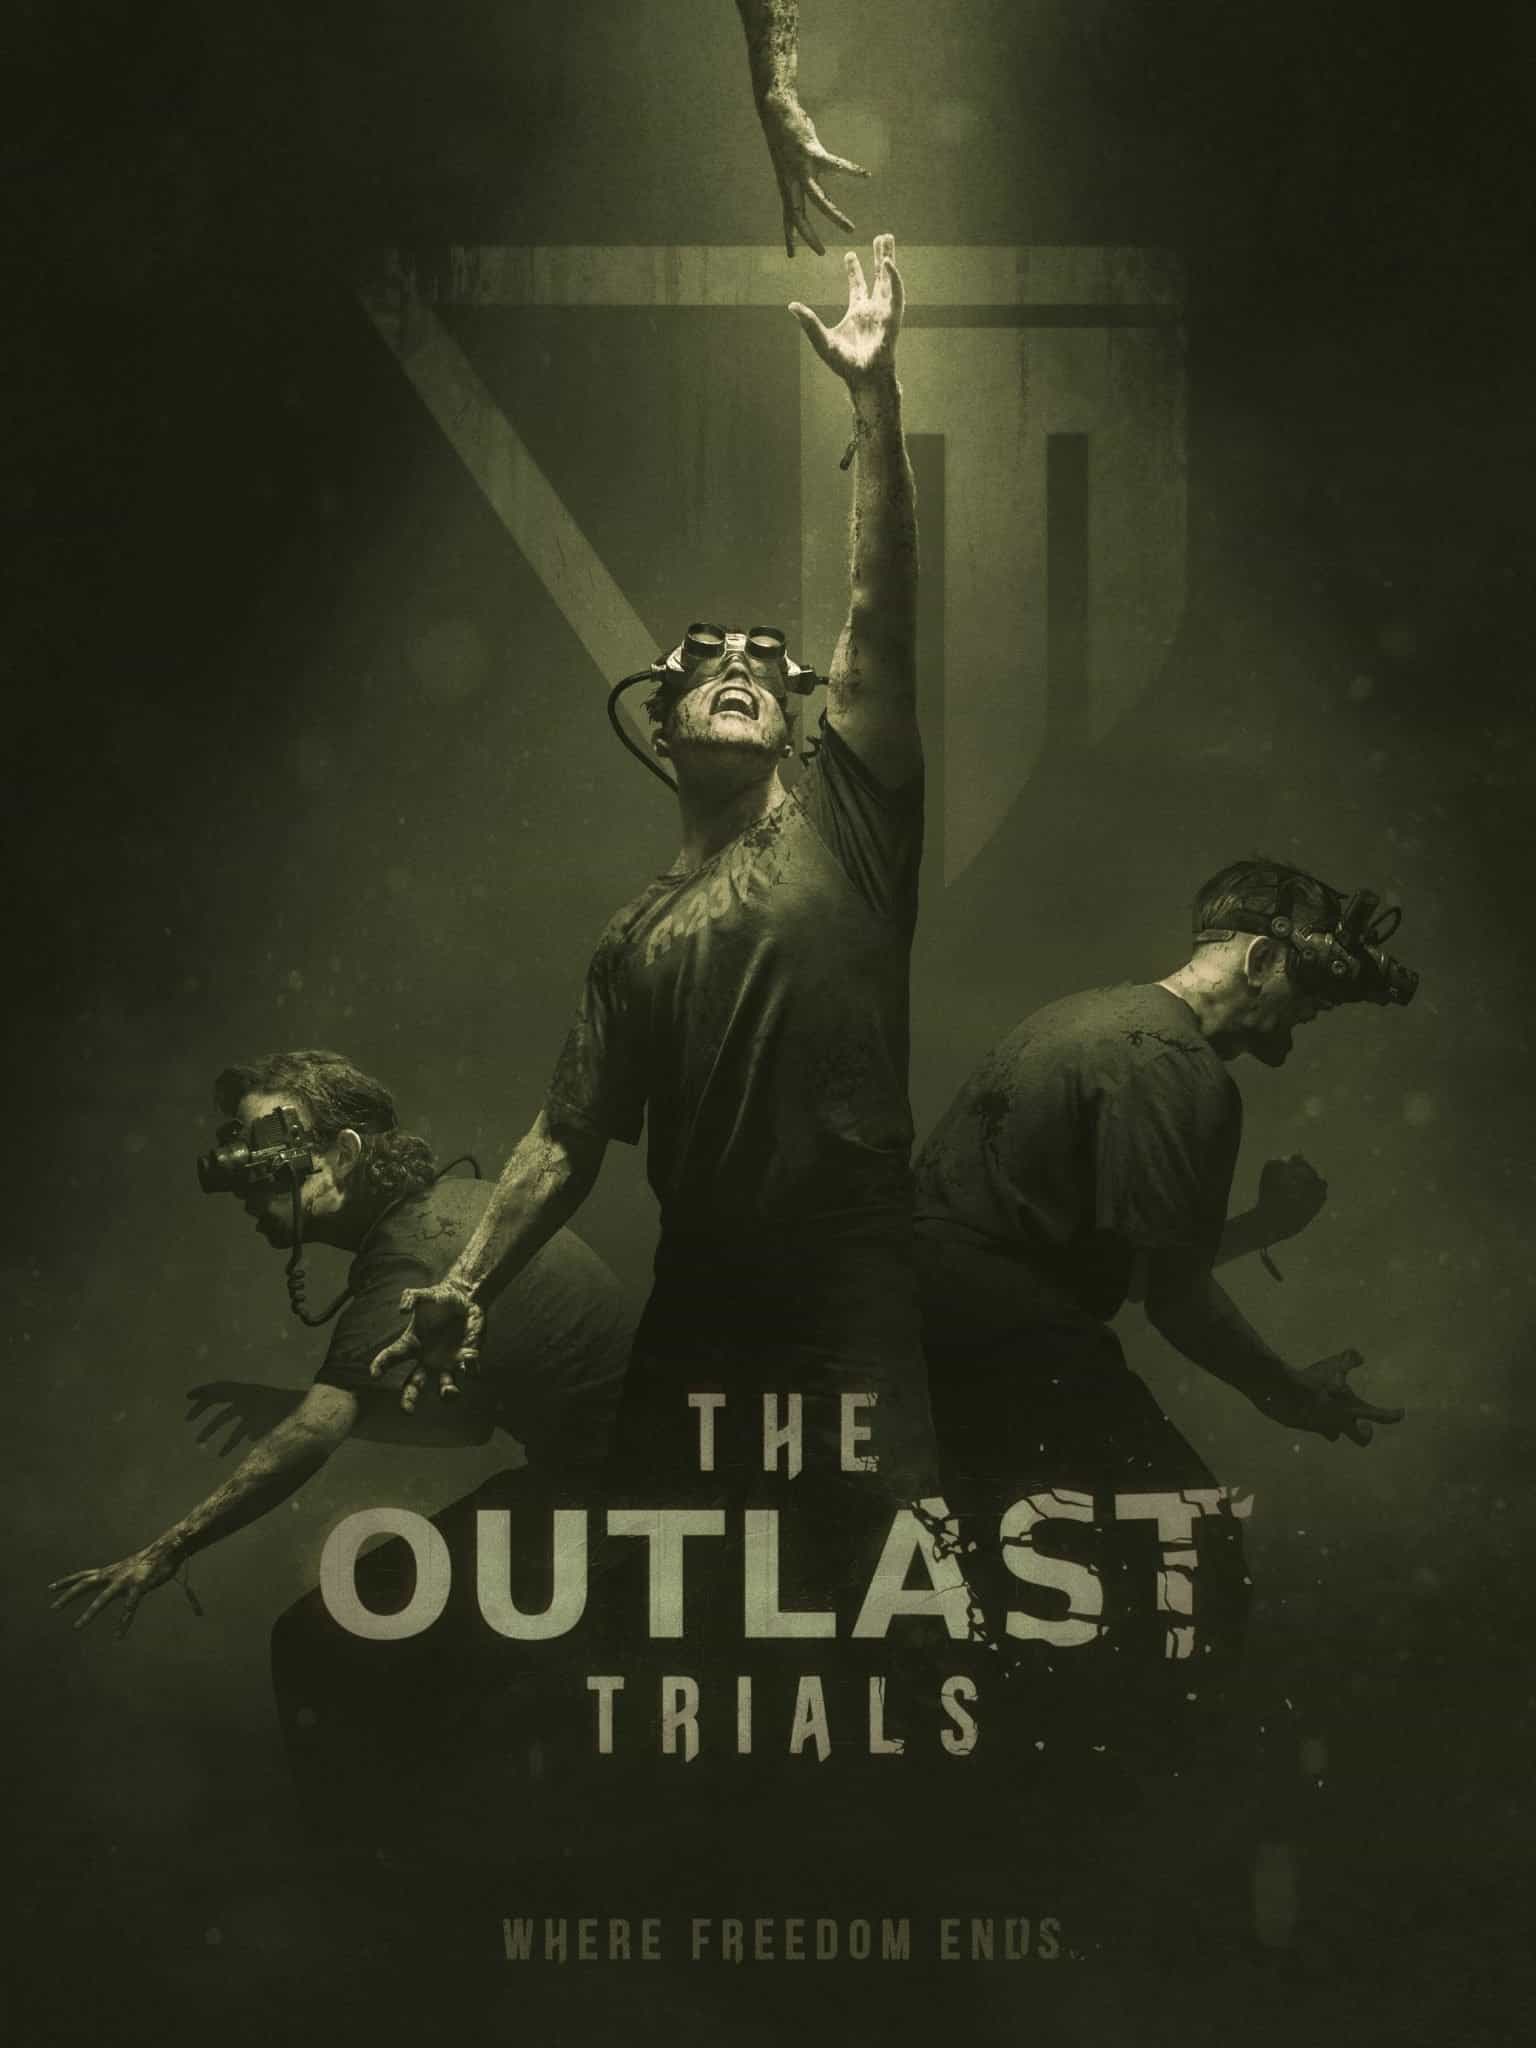 is outlast trials crossplay